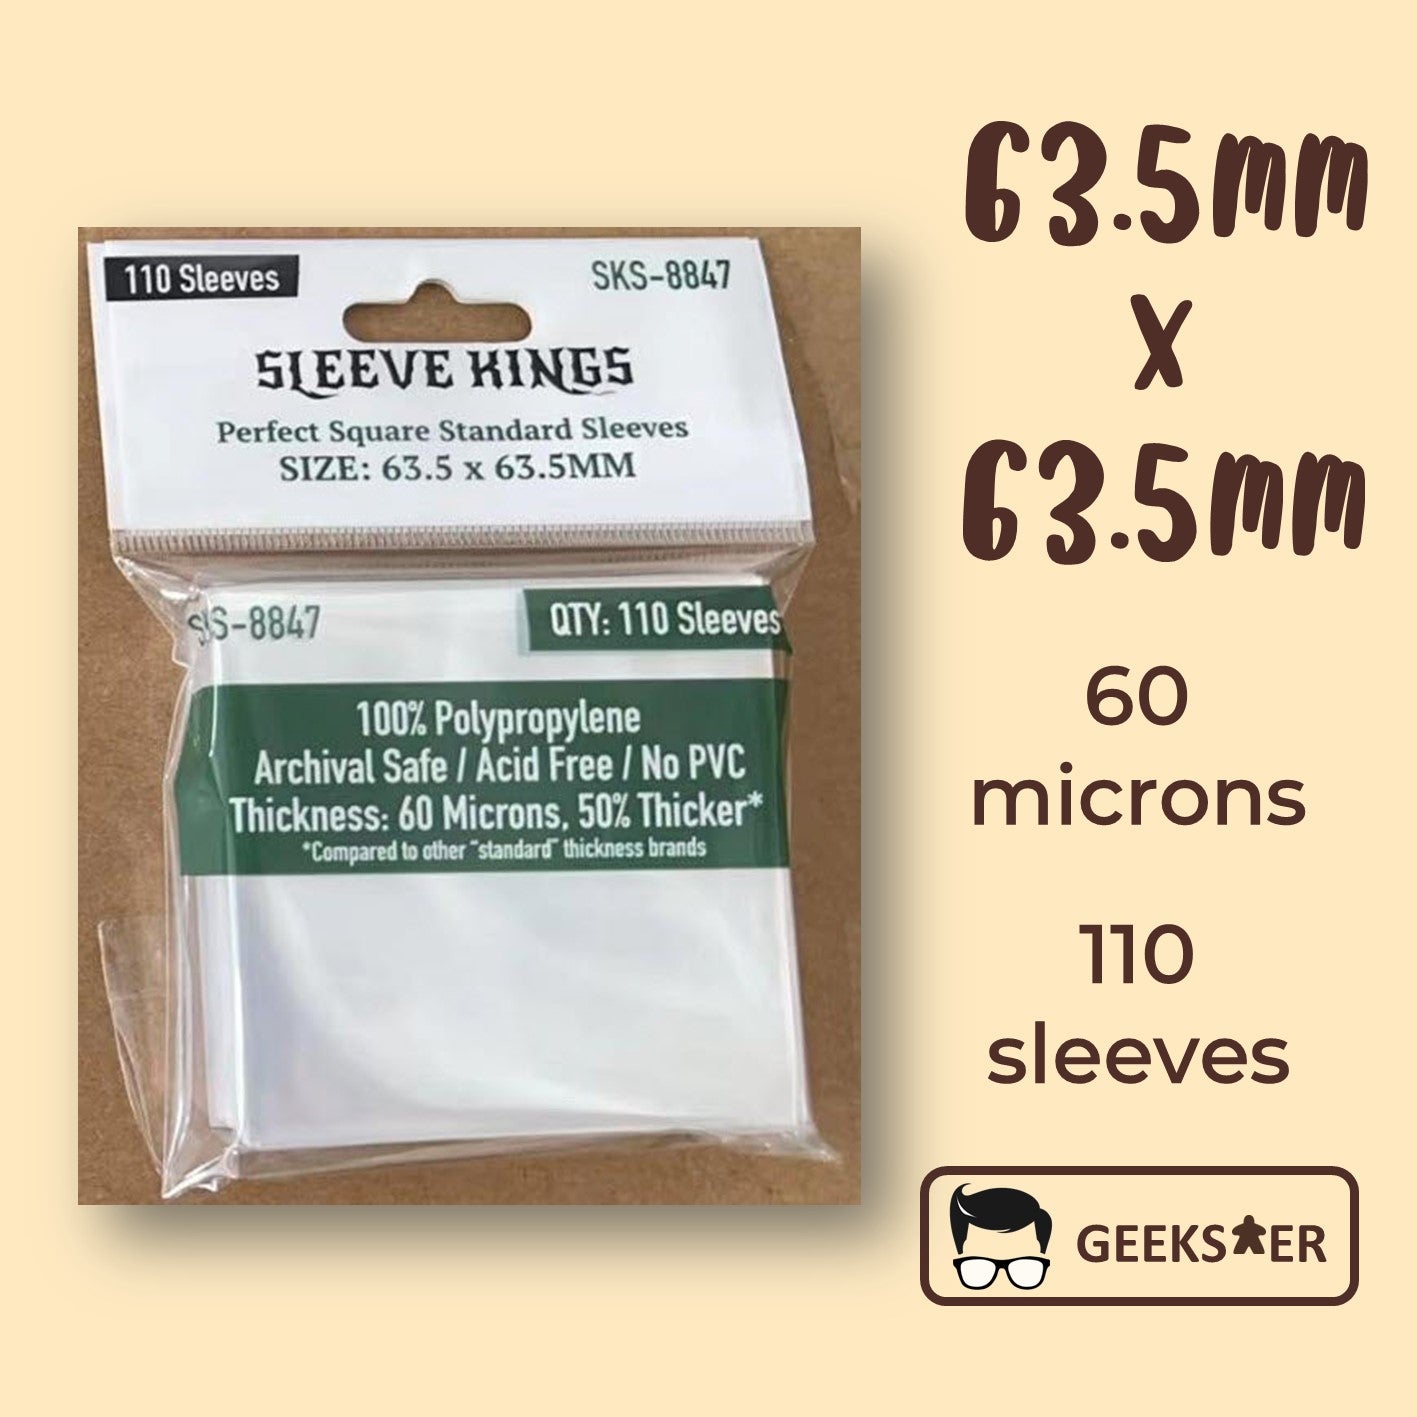 [63.5 X 63.5mm] 8847 Sleeve Kings Small Square